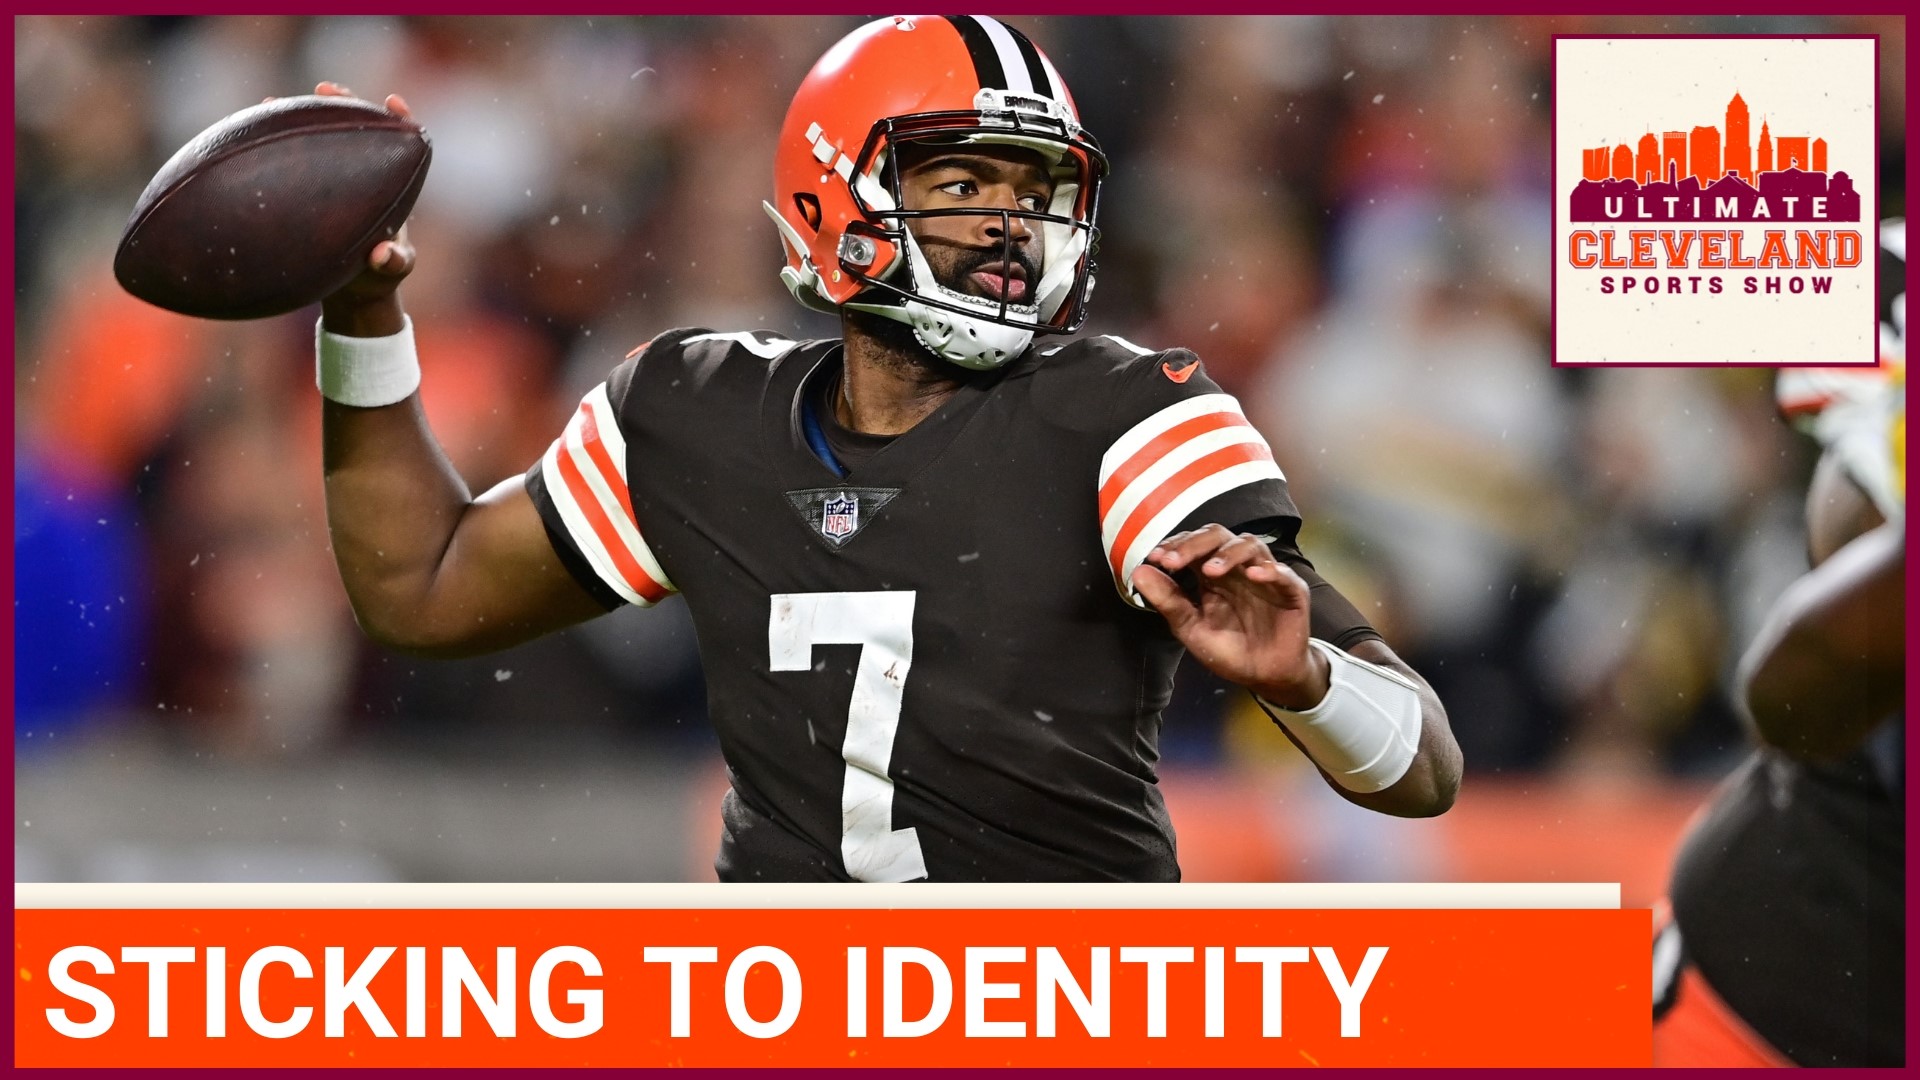 The Cleveland Browns and Jacoby Brissett are having success by simply sticking to their identity